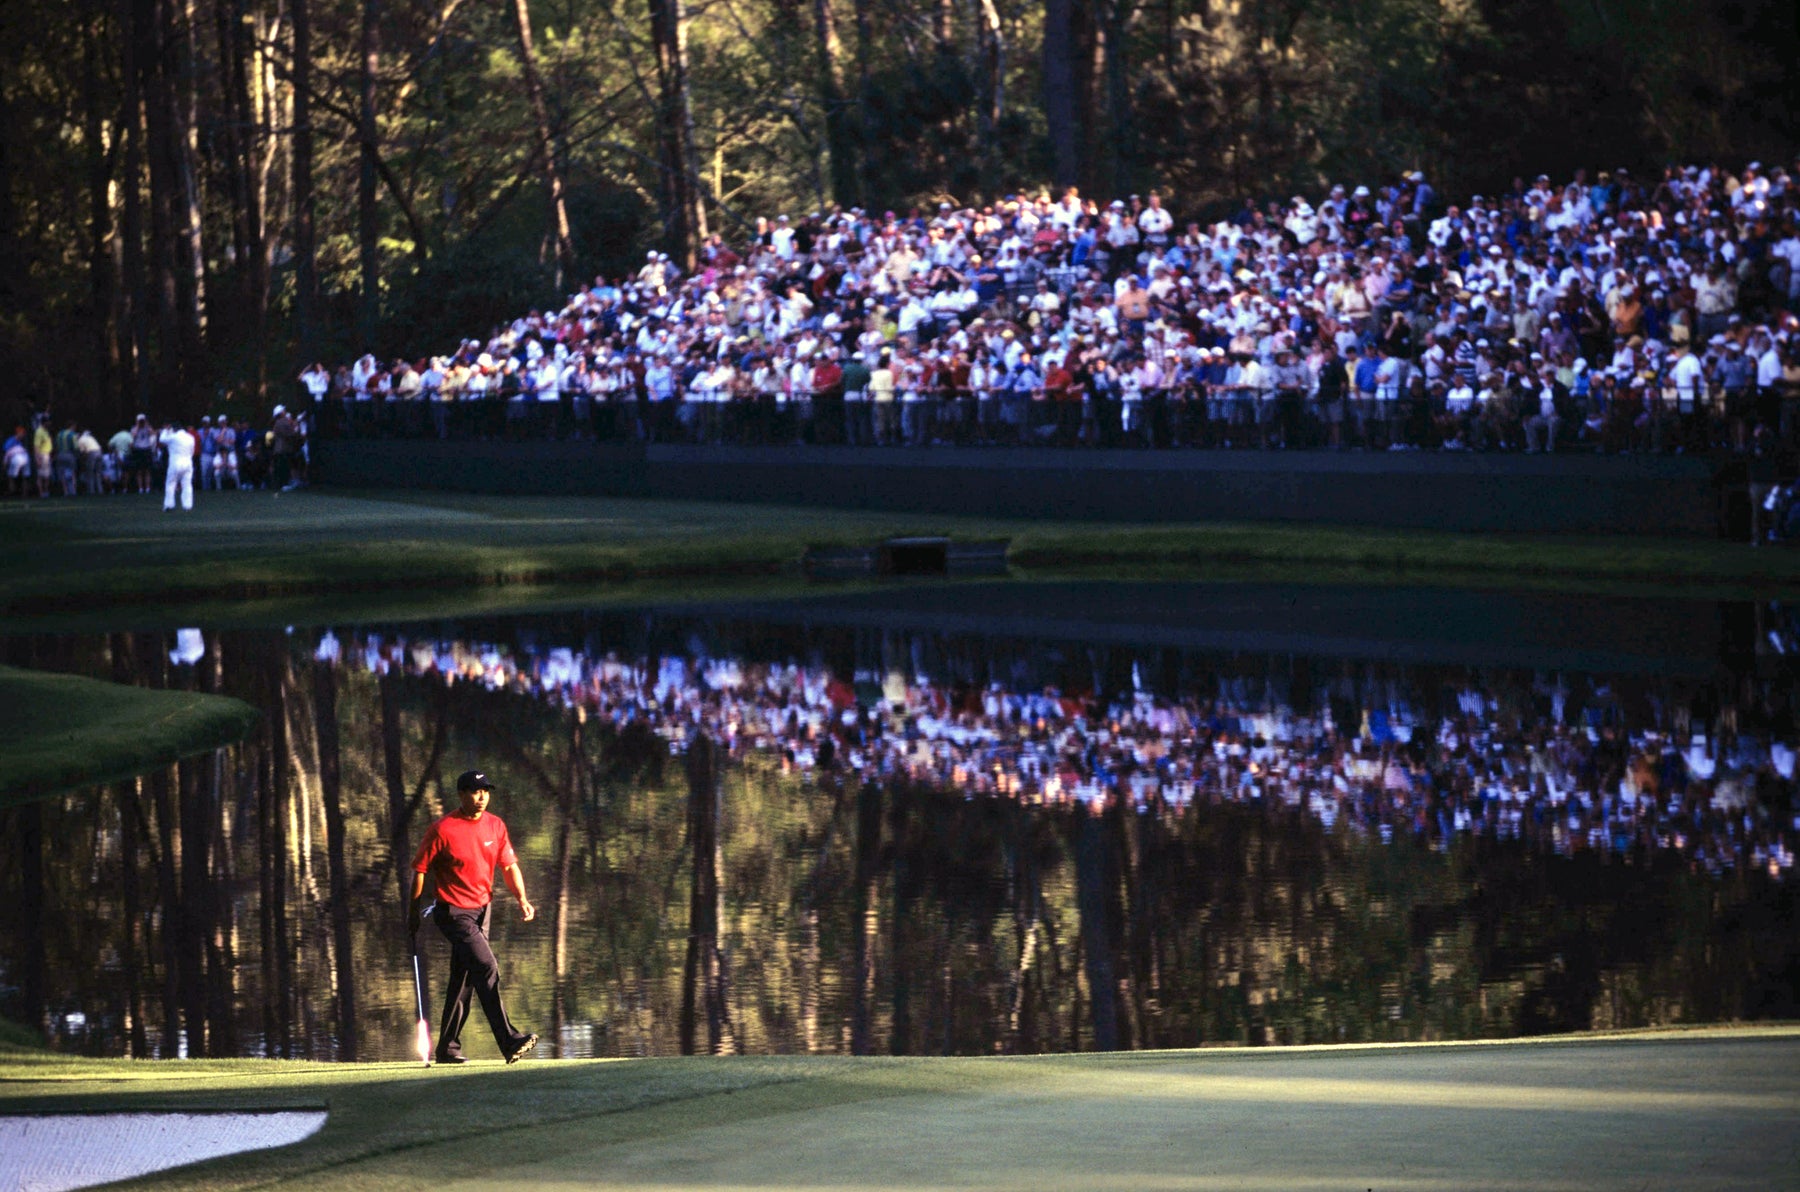 Tiger Woods on the 16th Green at The Masters in Augusta